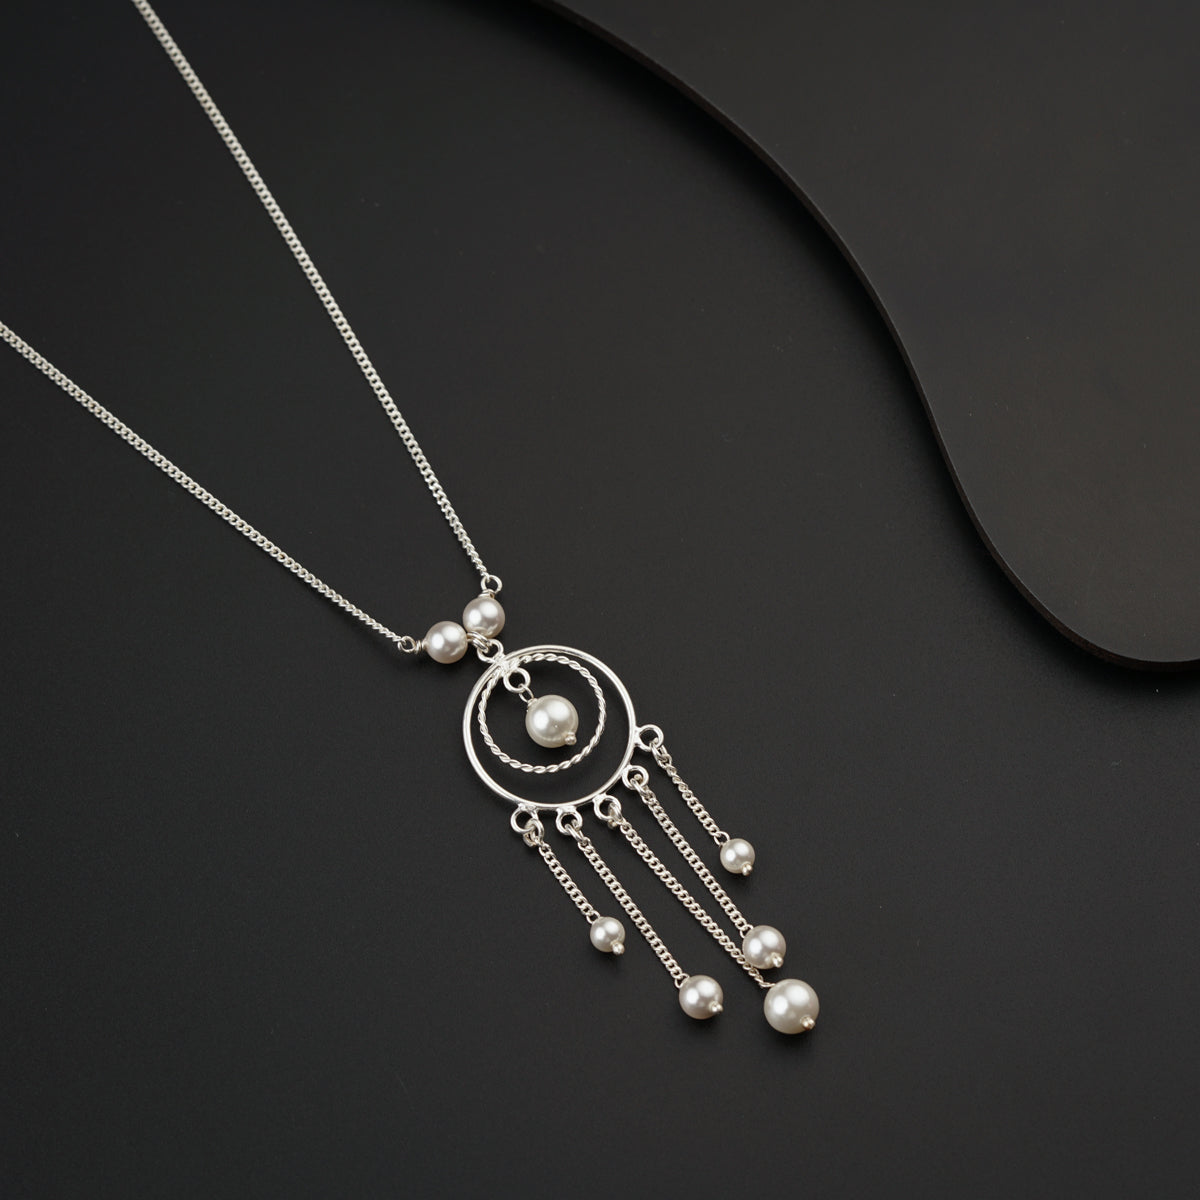 a silver necklace with pearls hanging from it